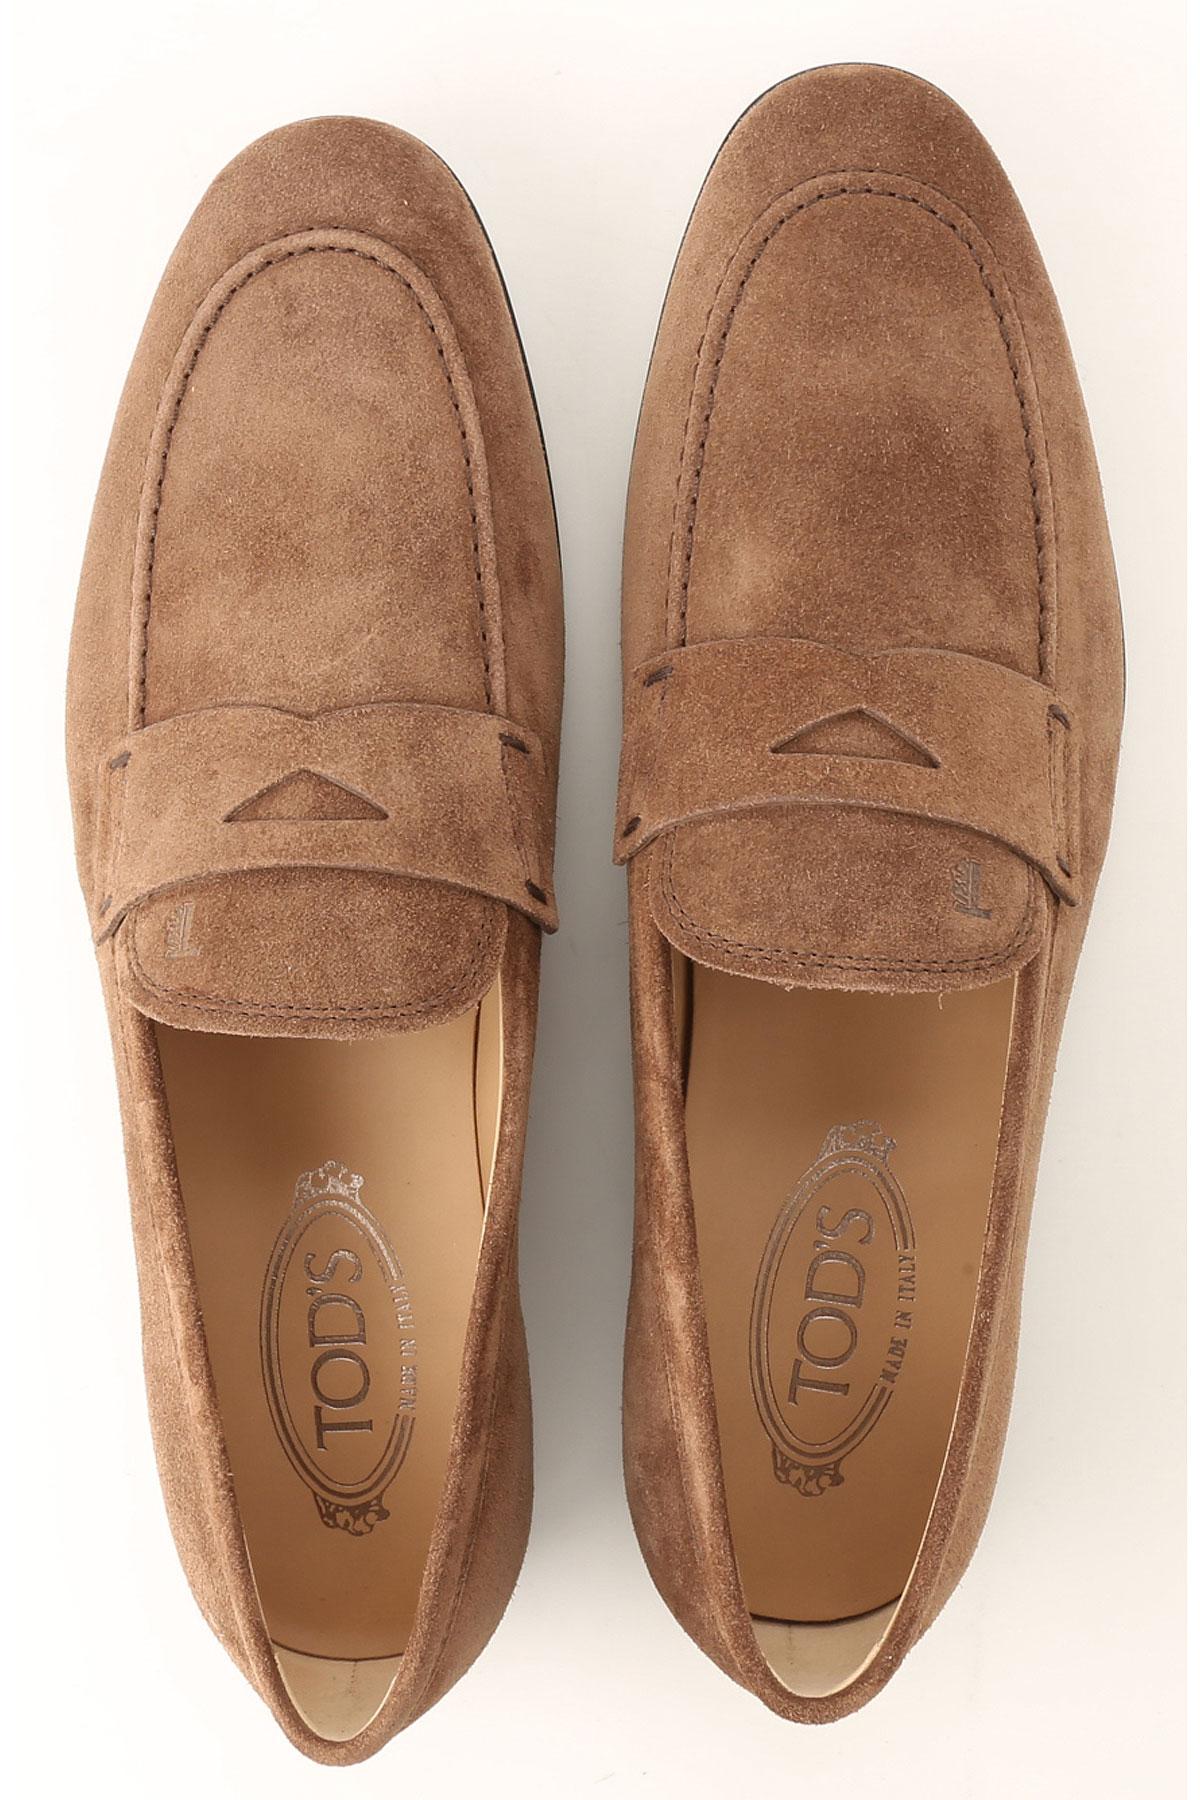 Tod's Leather Shoes For Men in Brown for Men - Lyst